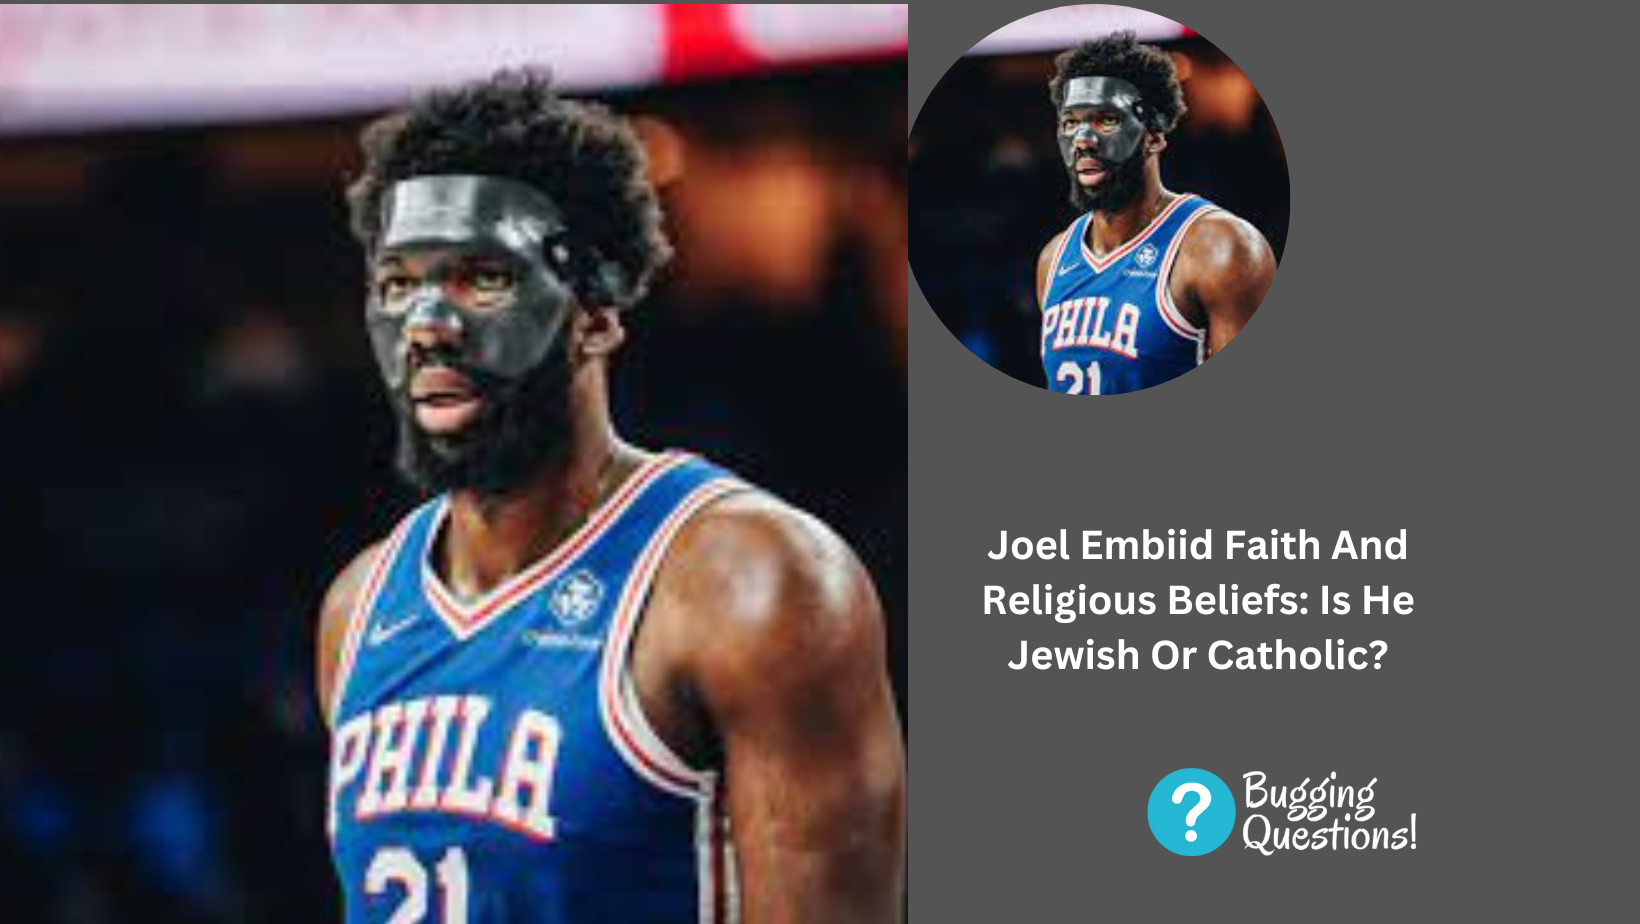 Joel Embiid Faith And Religious Beliefs: Is He Jewish Or Catholic?